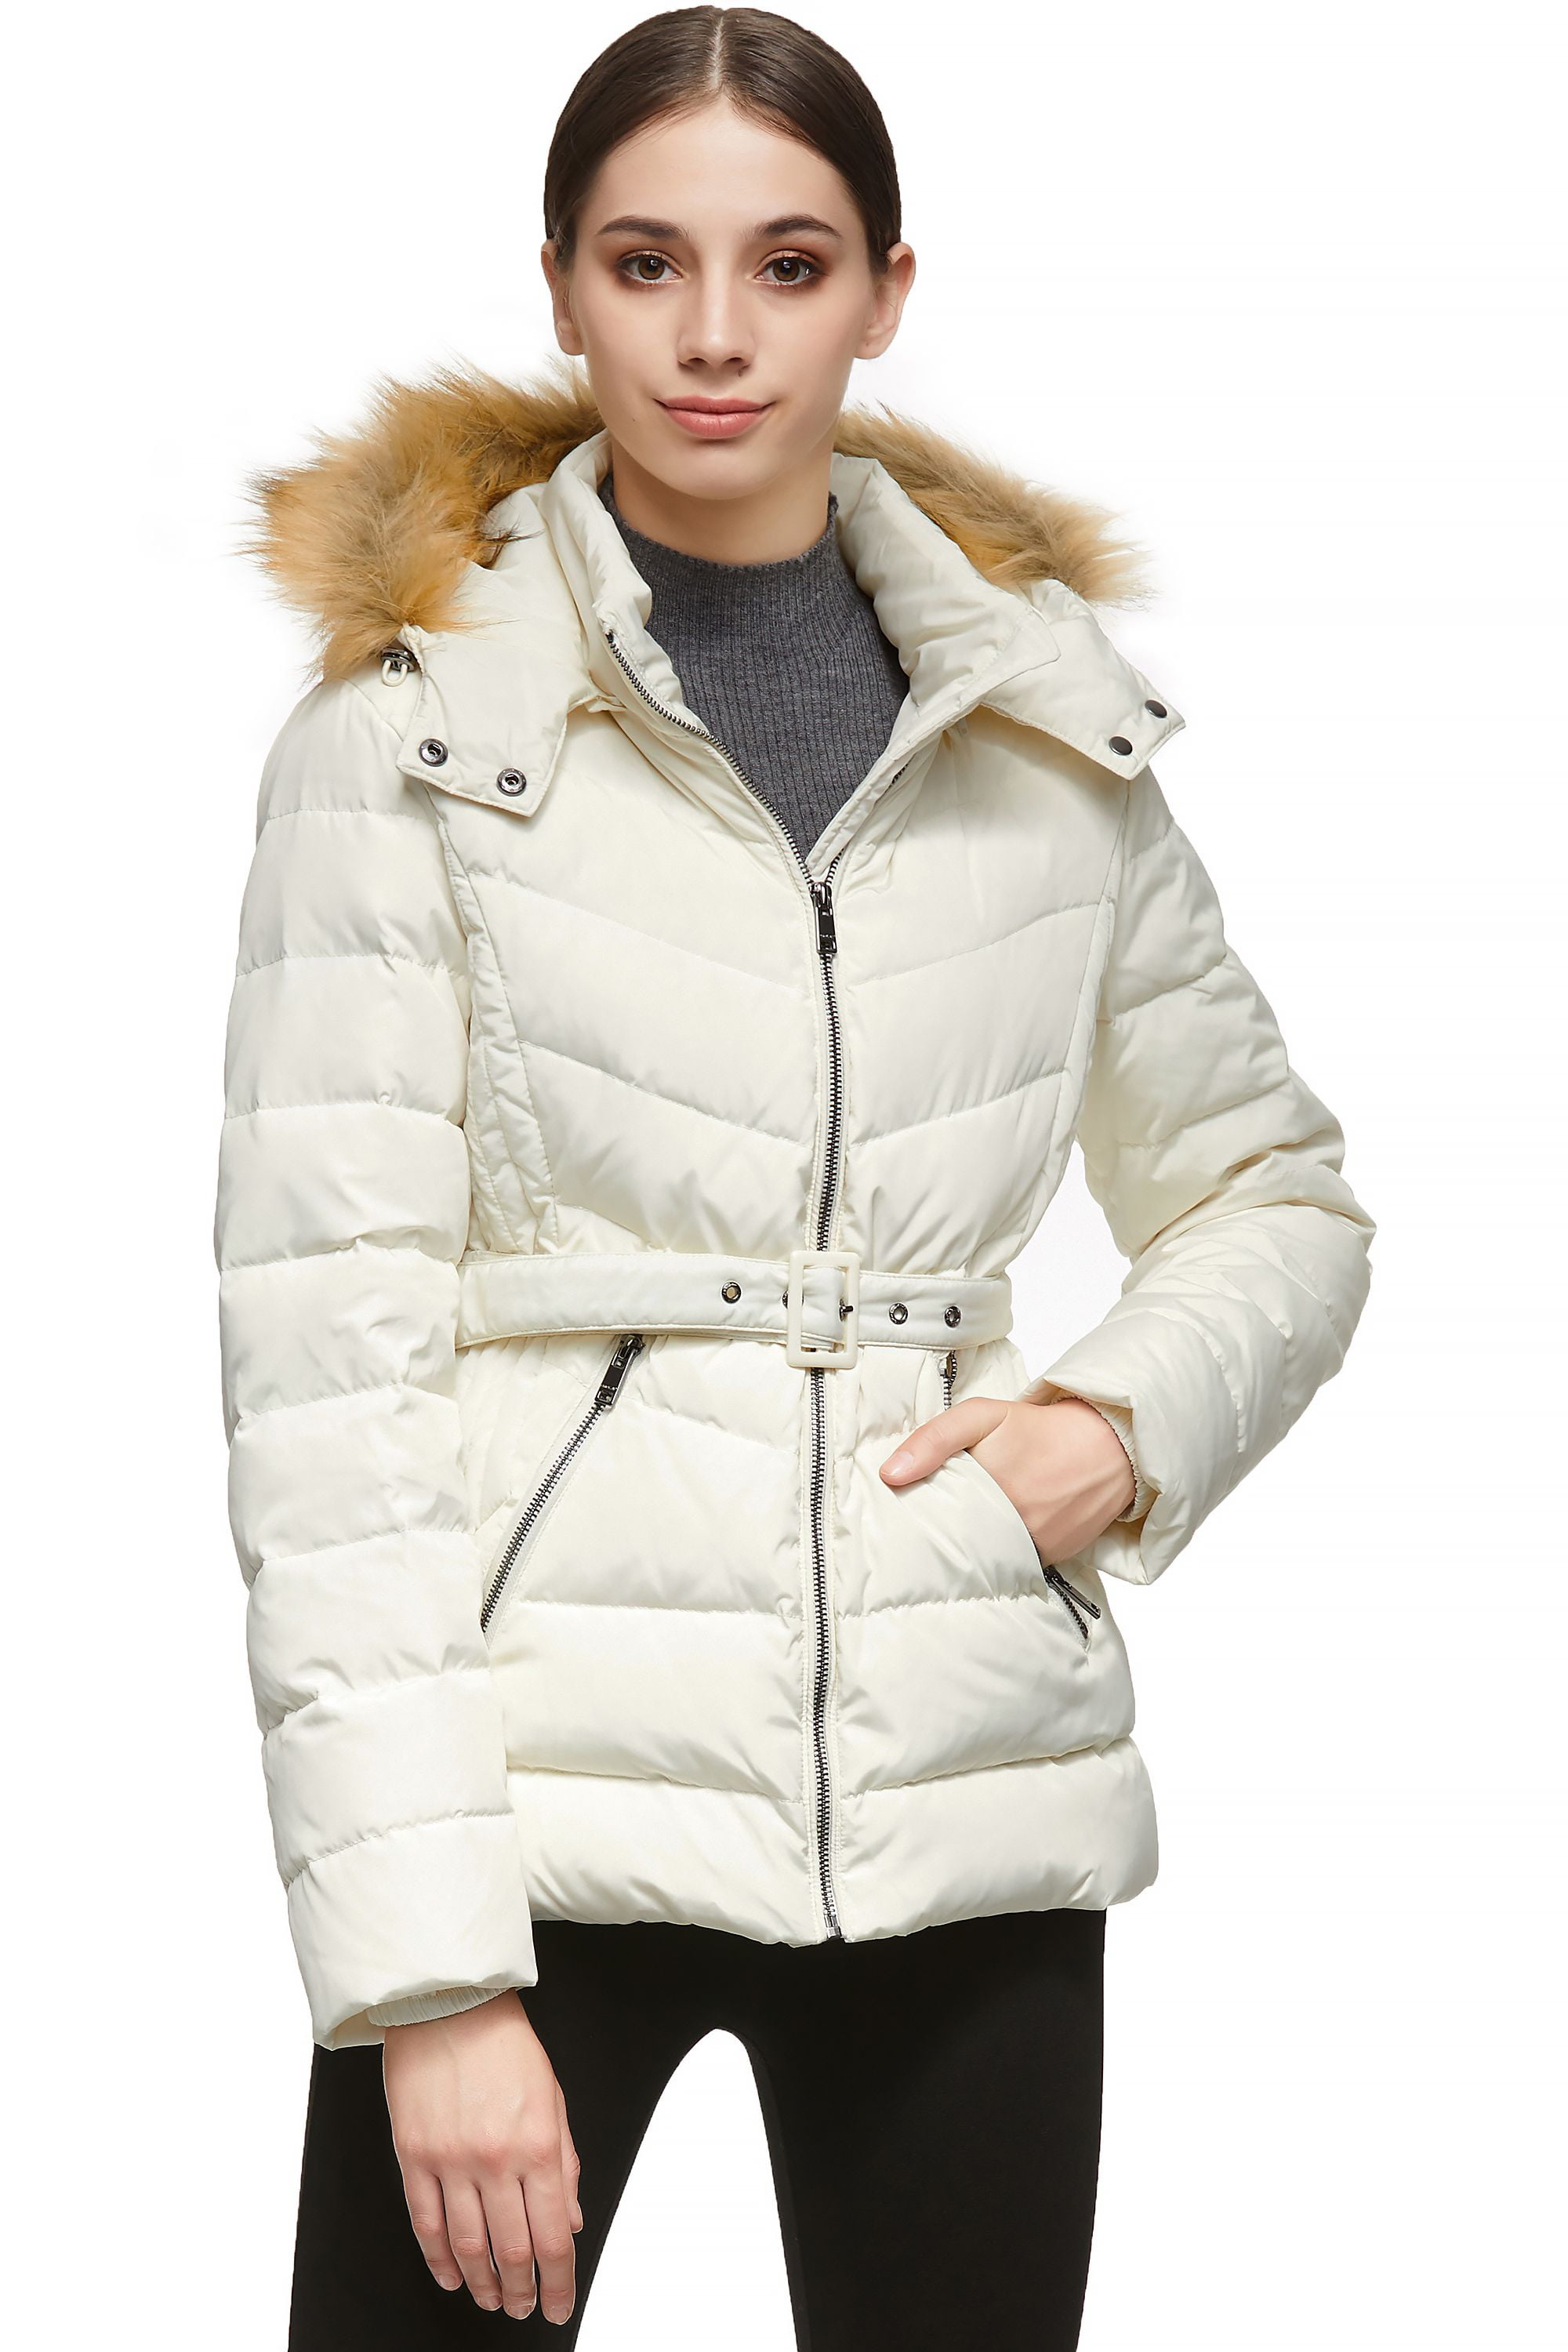 Orolay Womens Short Down Coat with Removable Elastic Belt 